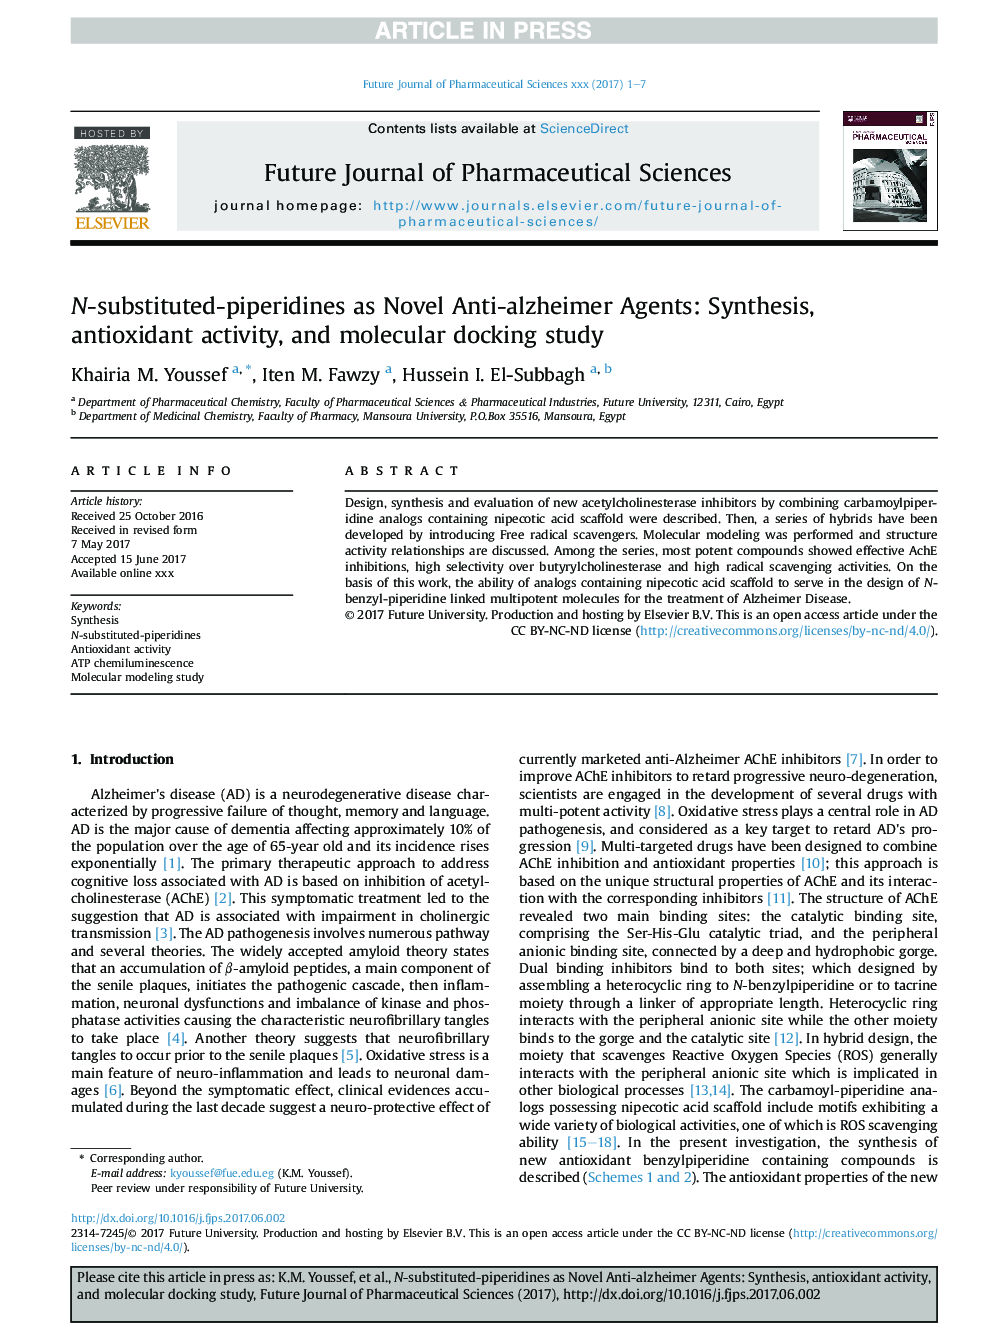 N-substituted-piperidines as Novel Anti-alzheimer Agents: Synthesis, antioxidant activity, and molecular docking study